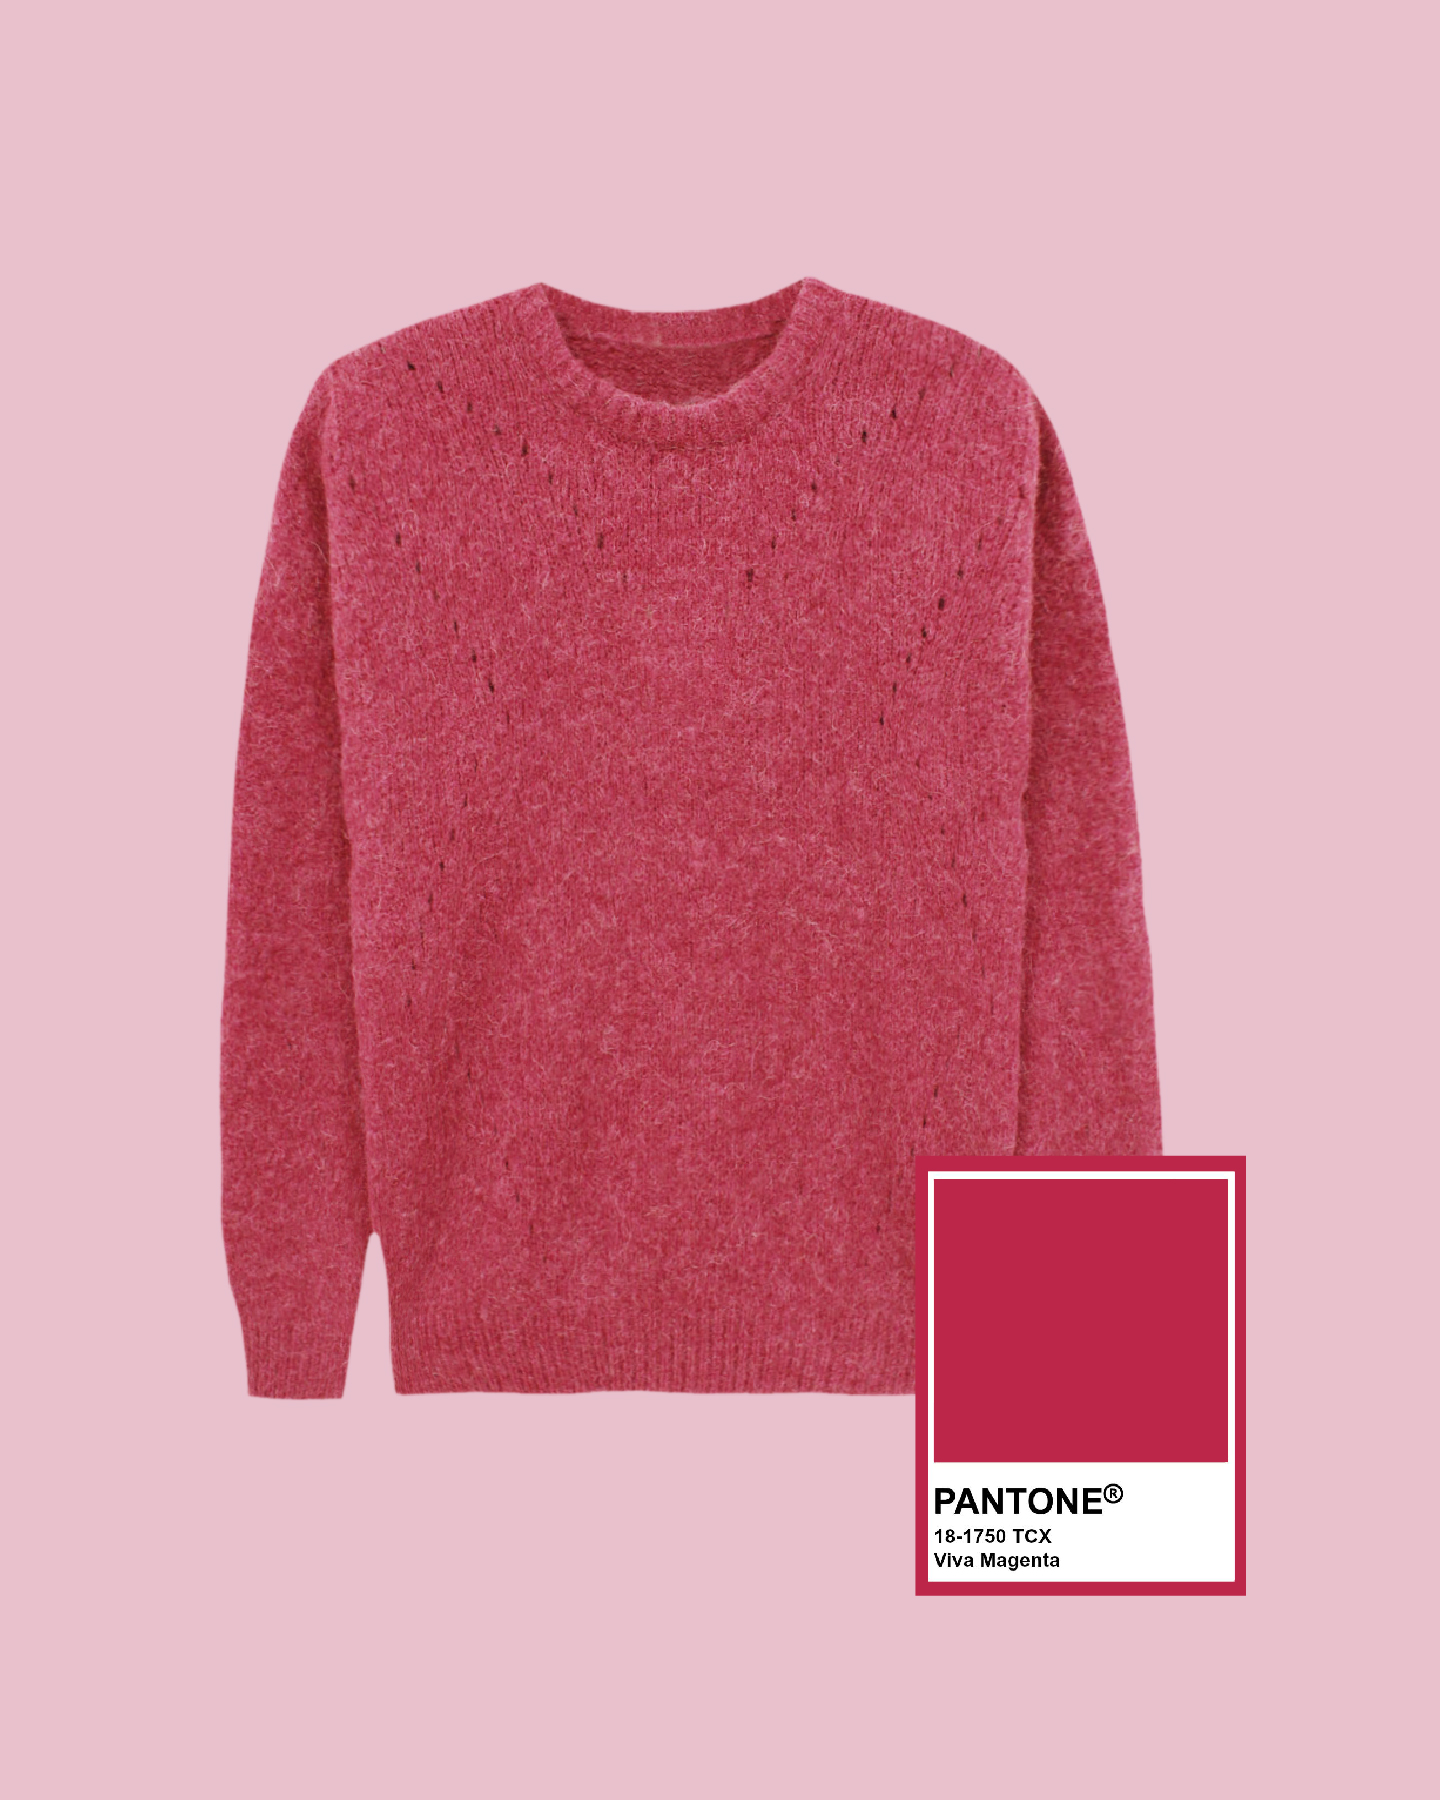 Where To Buy Viva Magenta: Pantone Color Of The Year 2023